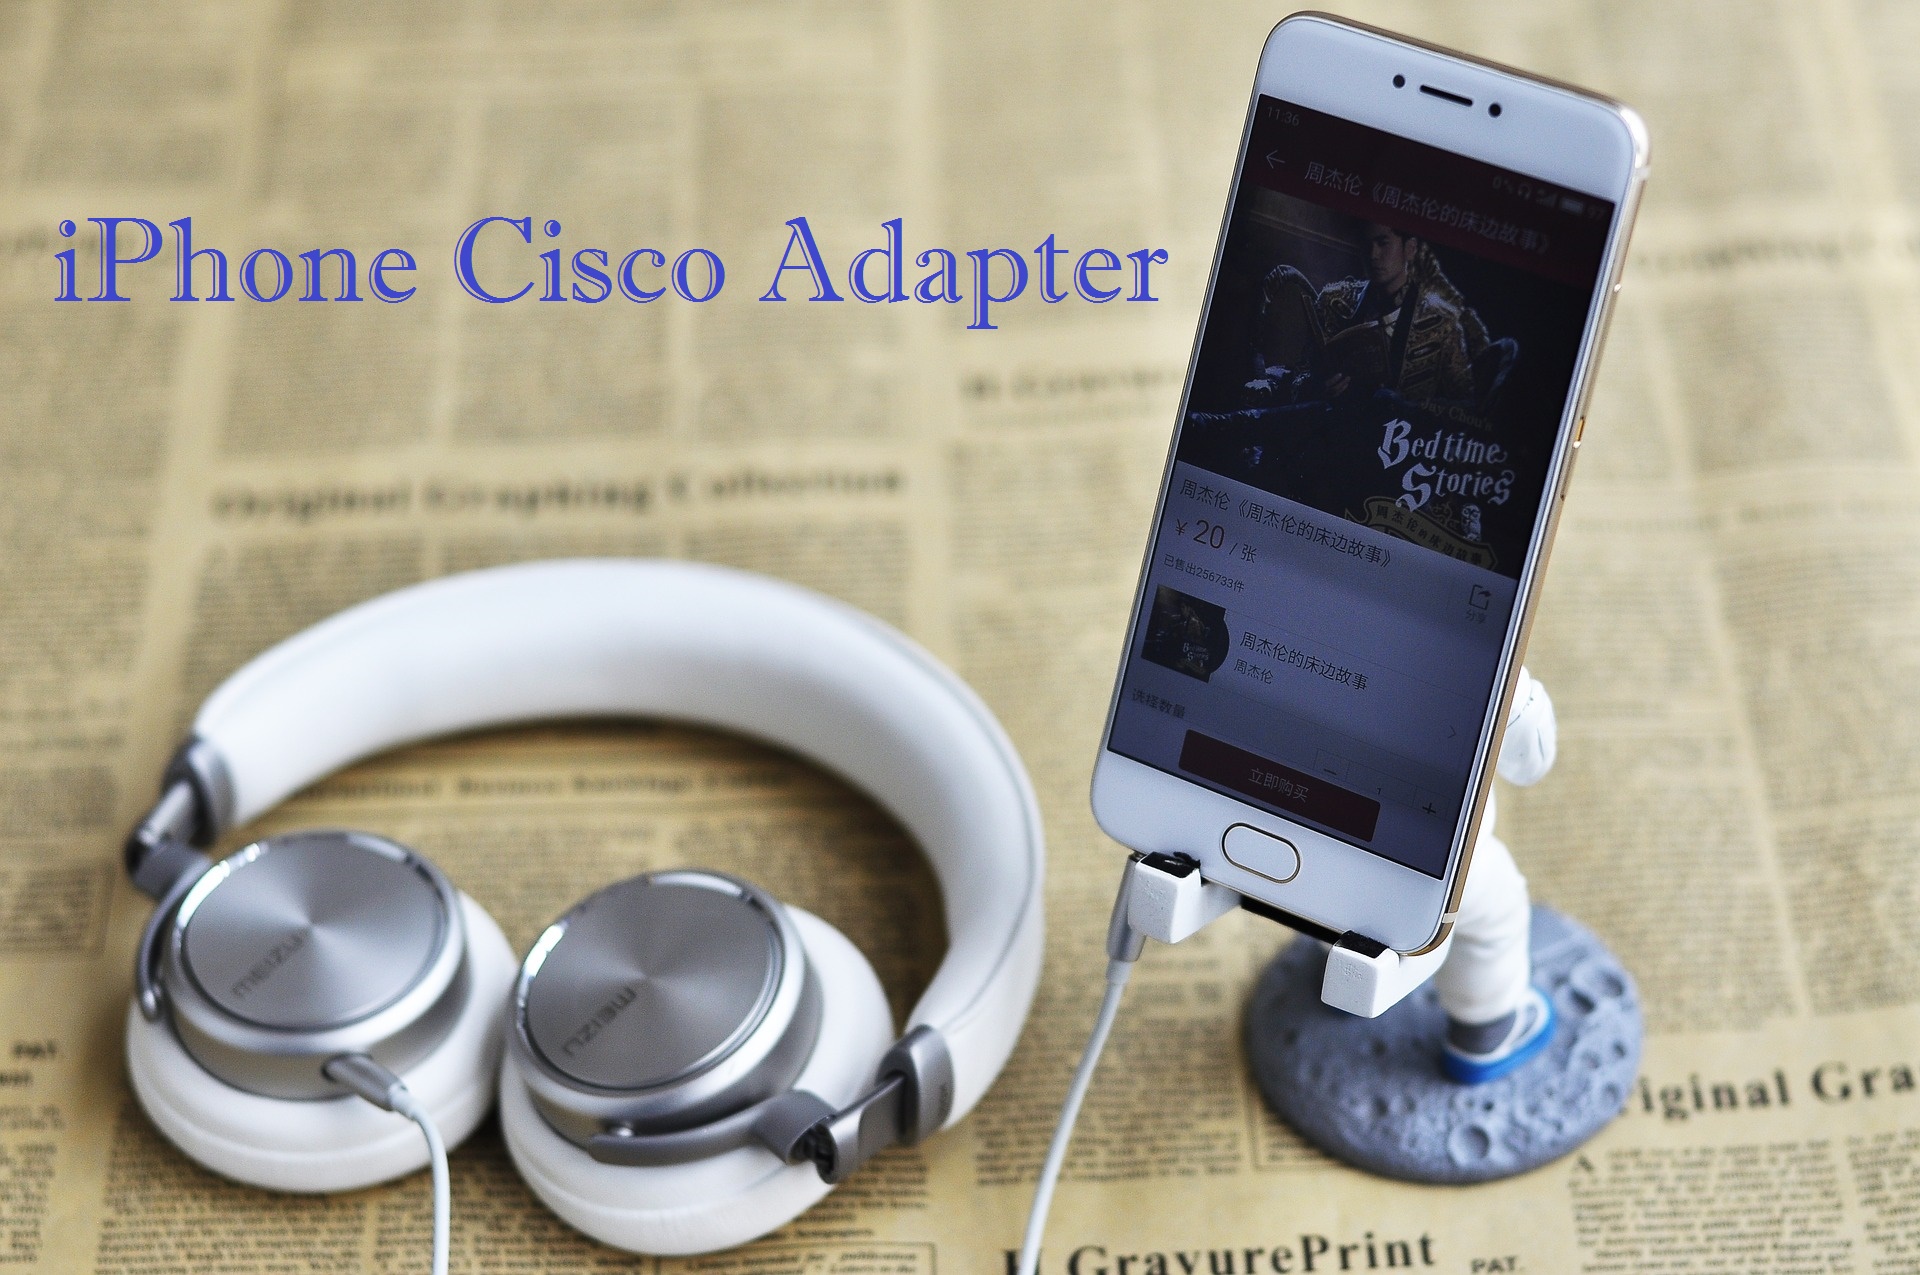 Cisco Headset Adapter for iPhone Headset